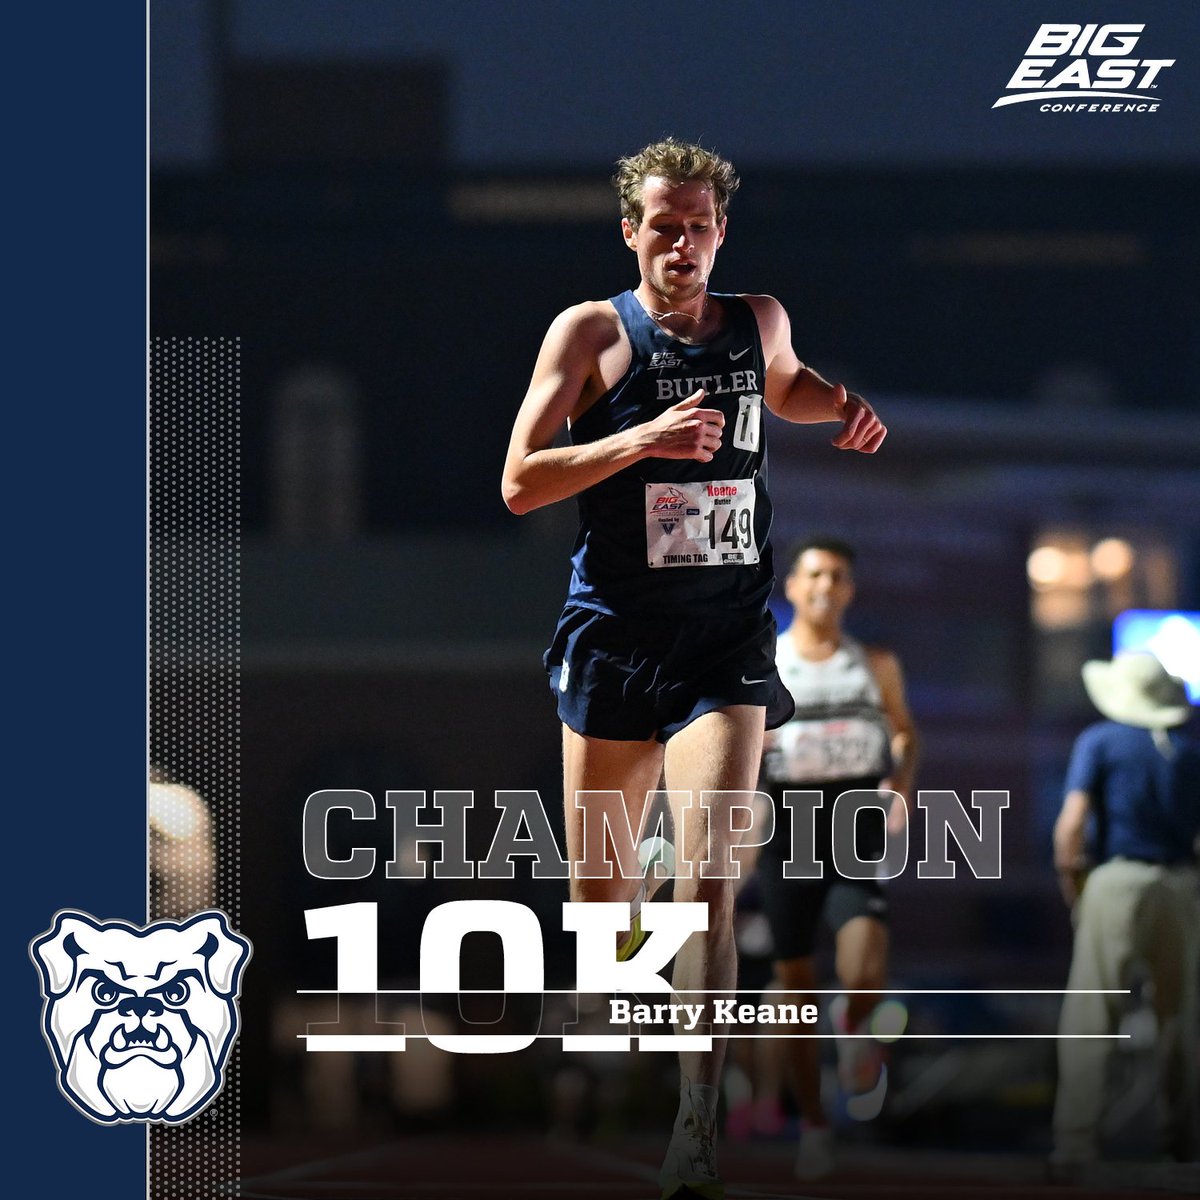 Congrats to Barry Keane on his historic run to a BIG EAST title! #ButlerWay